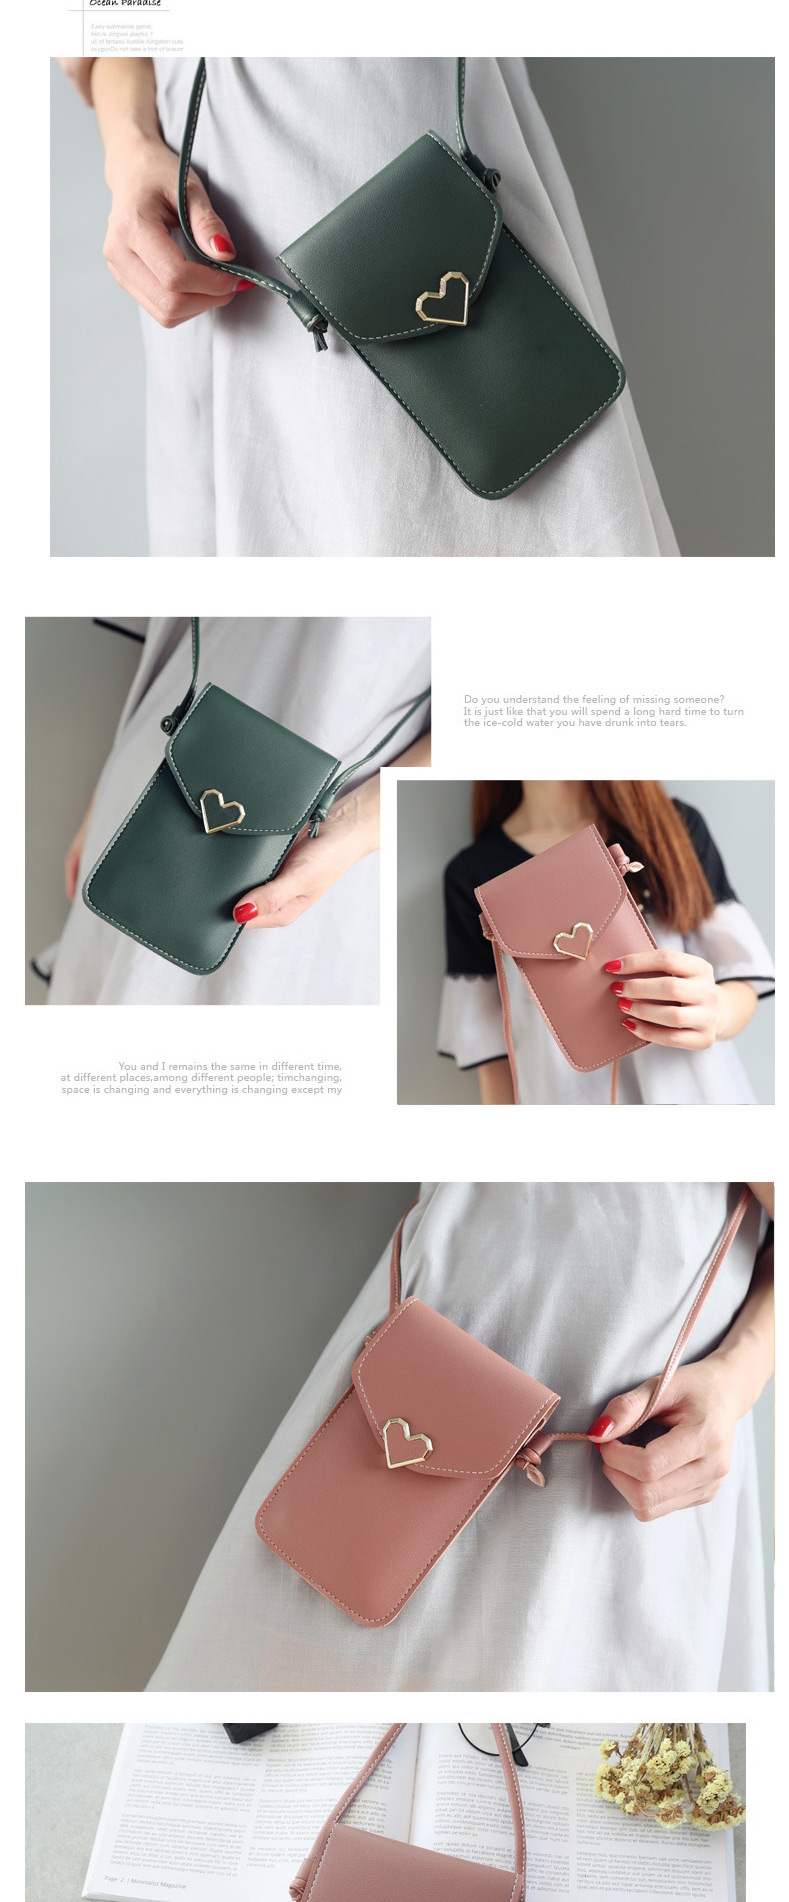 Fashion Light Grey Caring Metal Transparent Touch Screen Multifunctional Mobile Phone Bag,Shoulder bags